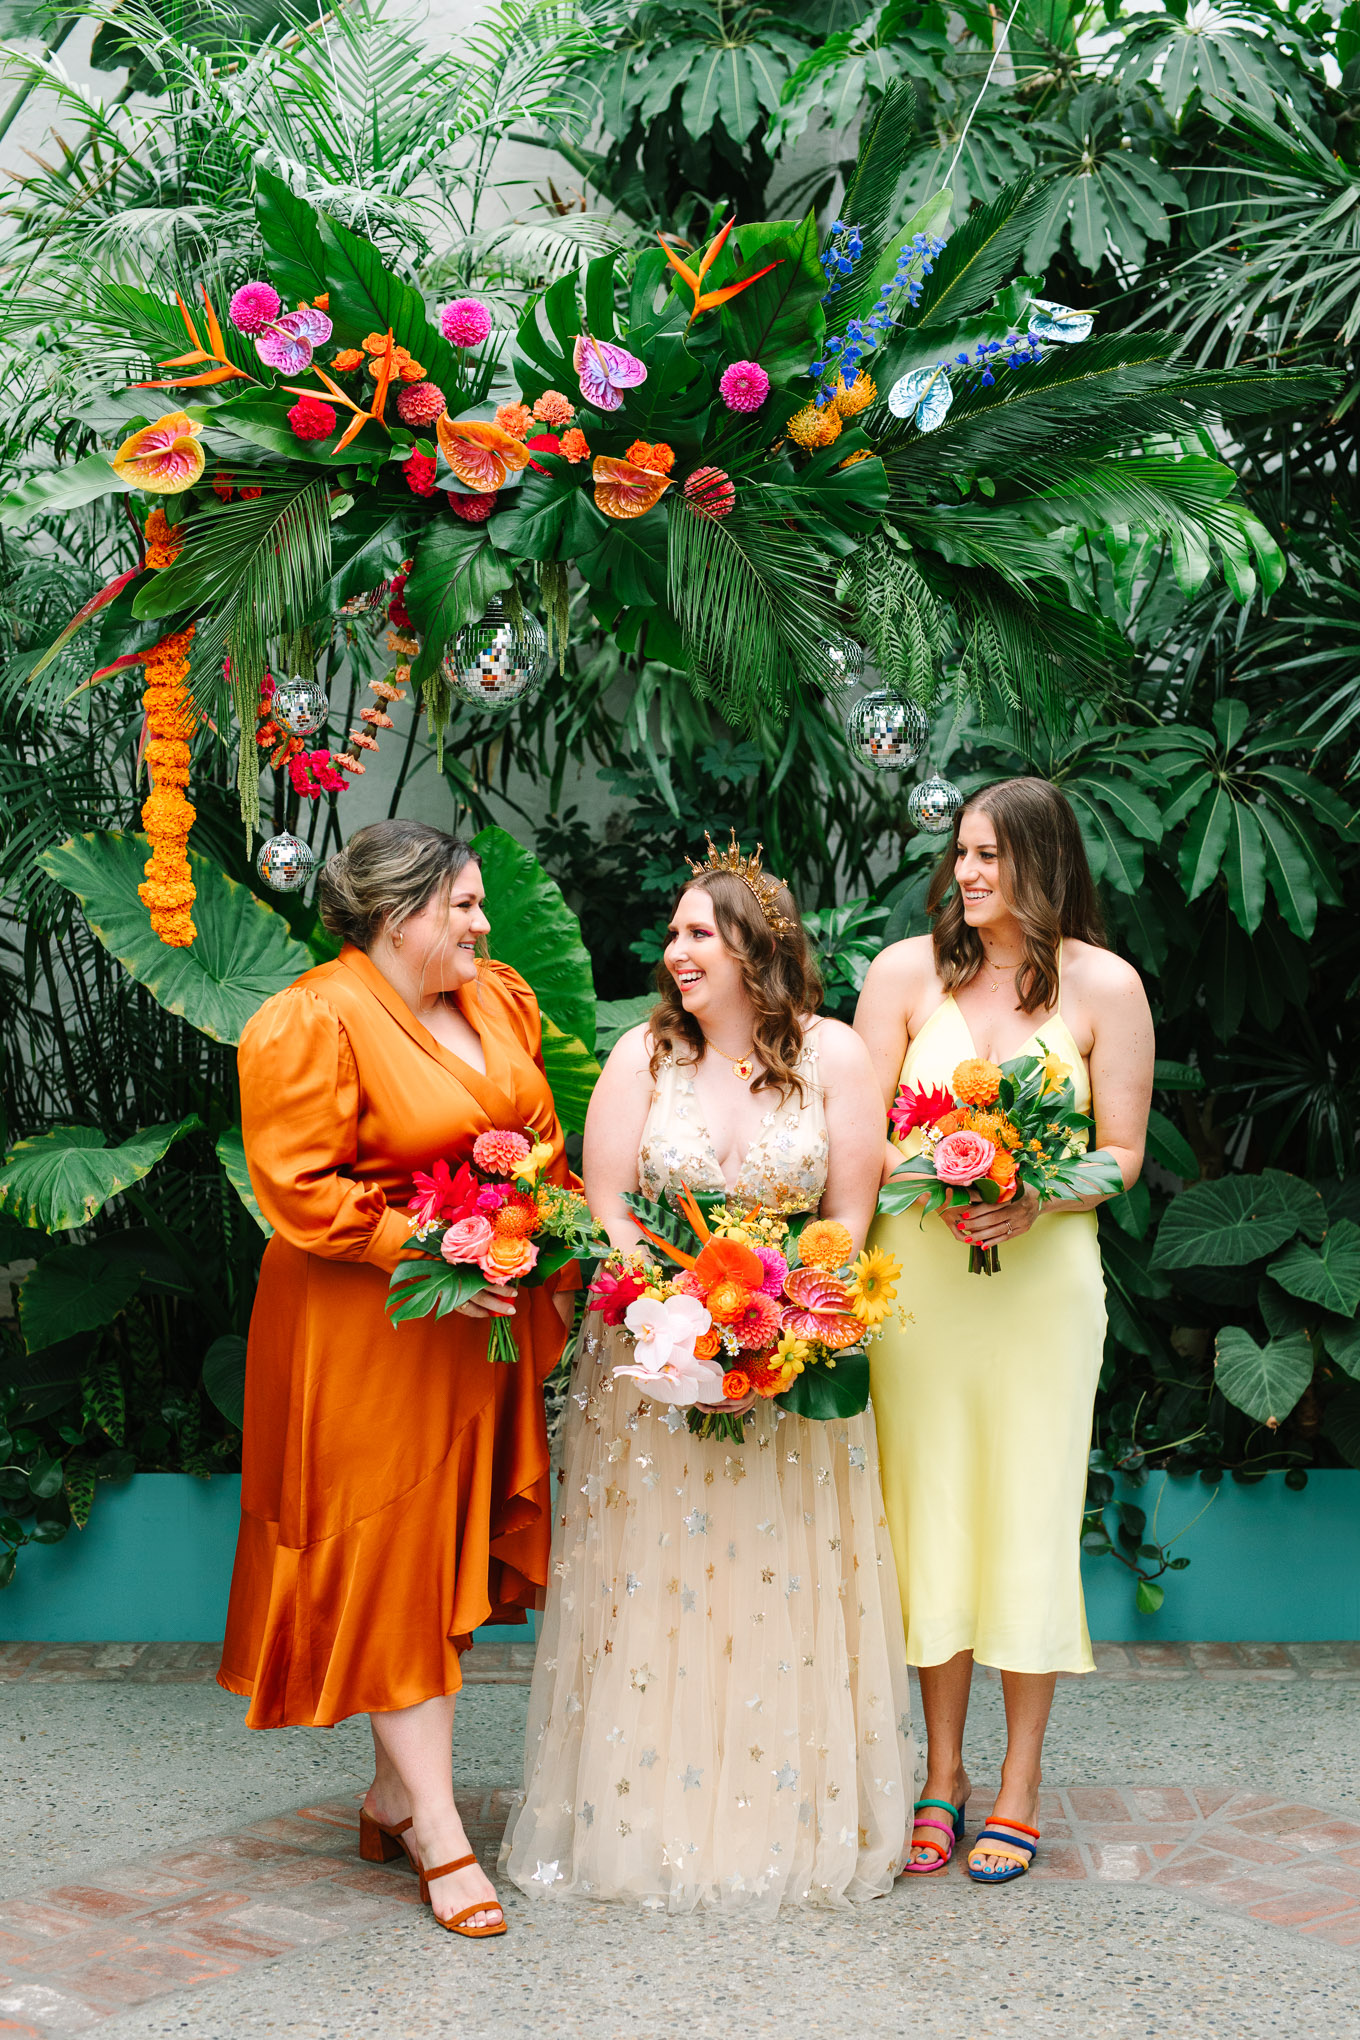 Bridesmaids with tropical ceremony installation | Colorful Downtown Los Angeles Valentine Wedding | Los Angeles wedding photographer | #losangeleswedding #colorfulwedding #DTLA #valentinedtla   Source: Mary Costa Photography | Los Angeles